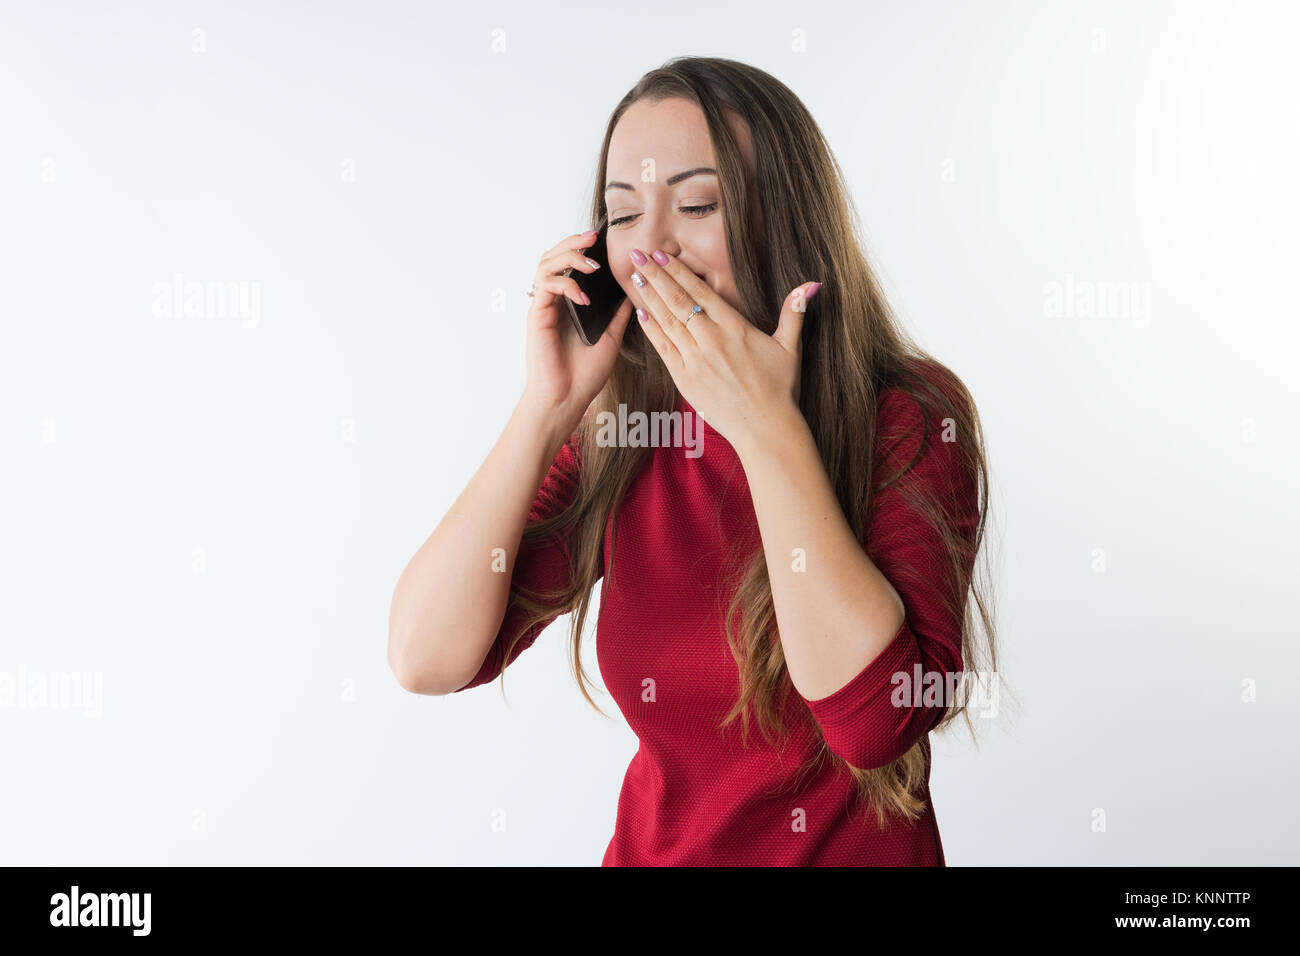 woman is speaking on her mobile phone and laughing covering her mouth with hand Stock Photo